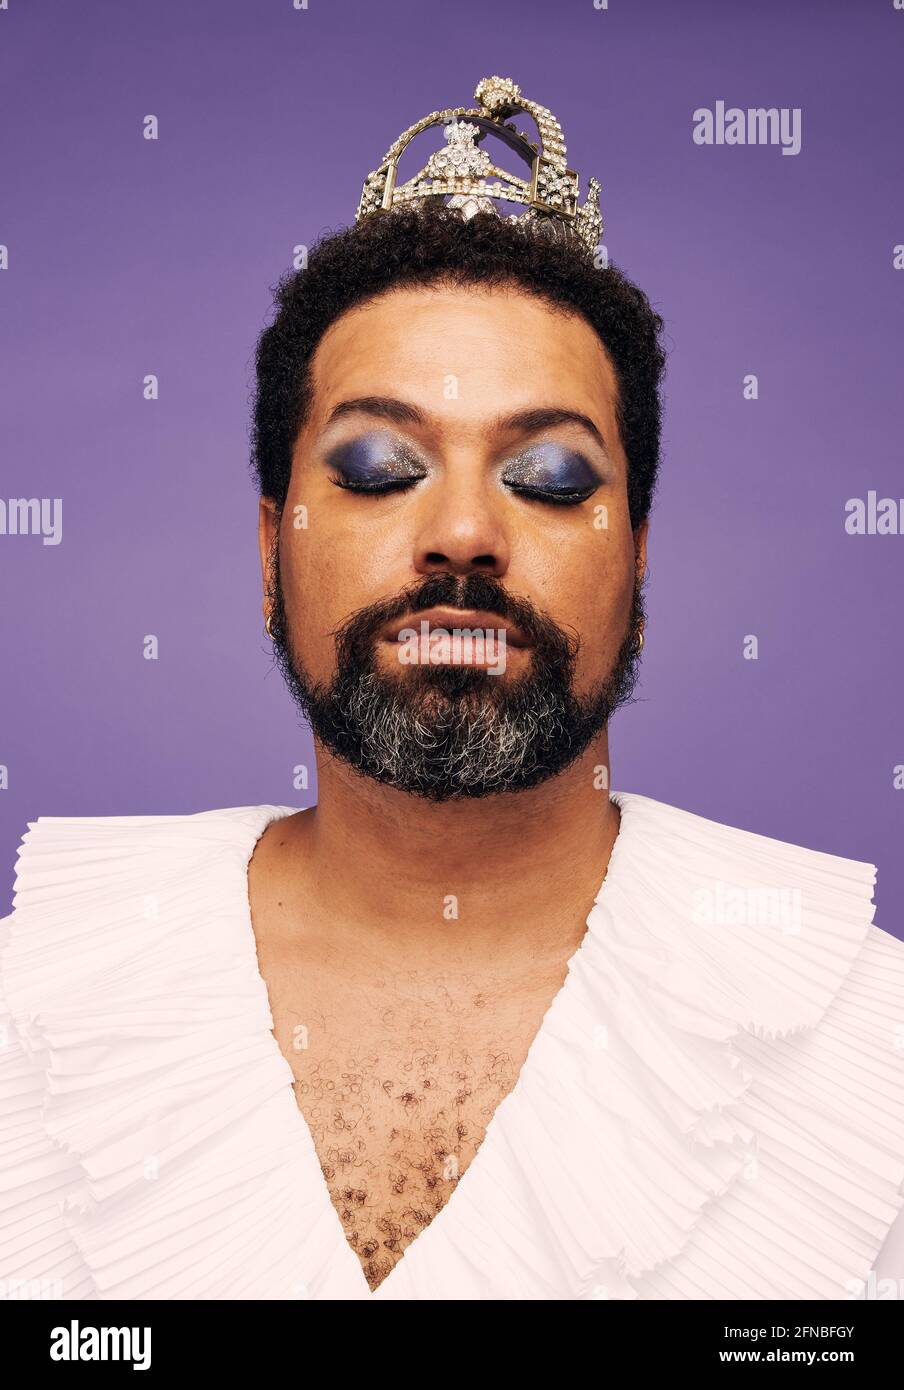 Portrait of a beard man with makeup and crown. Stunning looking drag queen  with eyes closed Stock Photo - Alamy